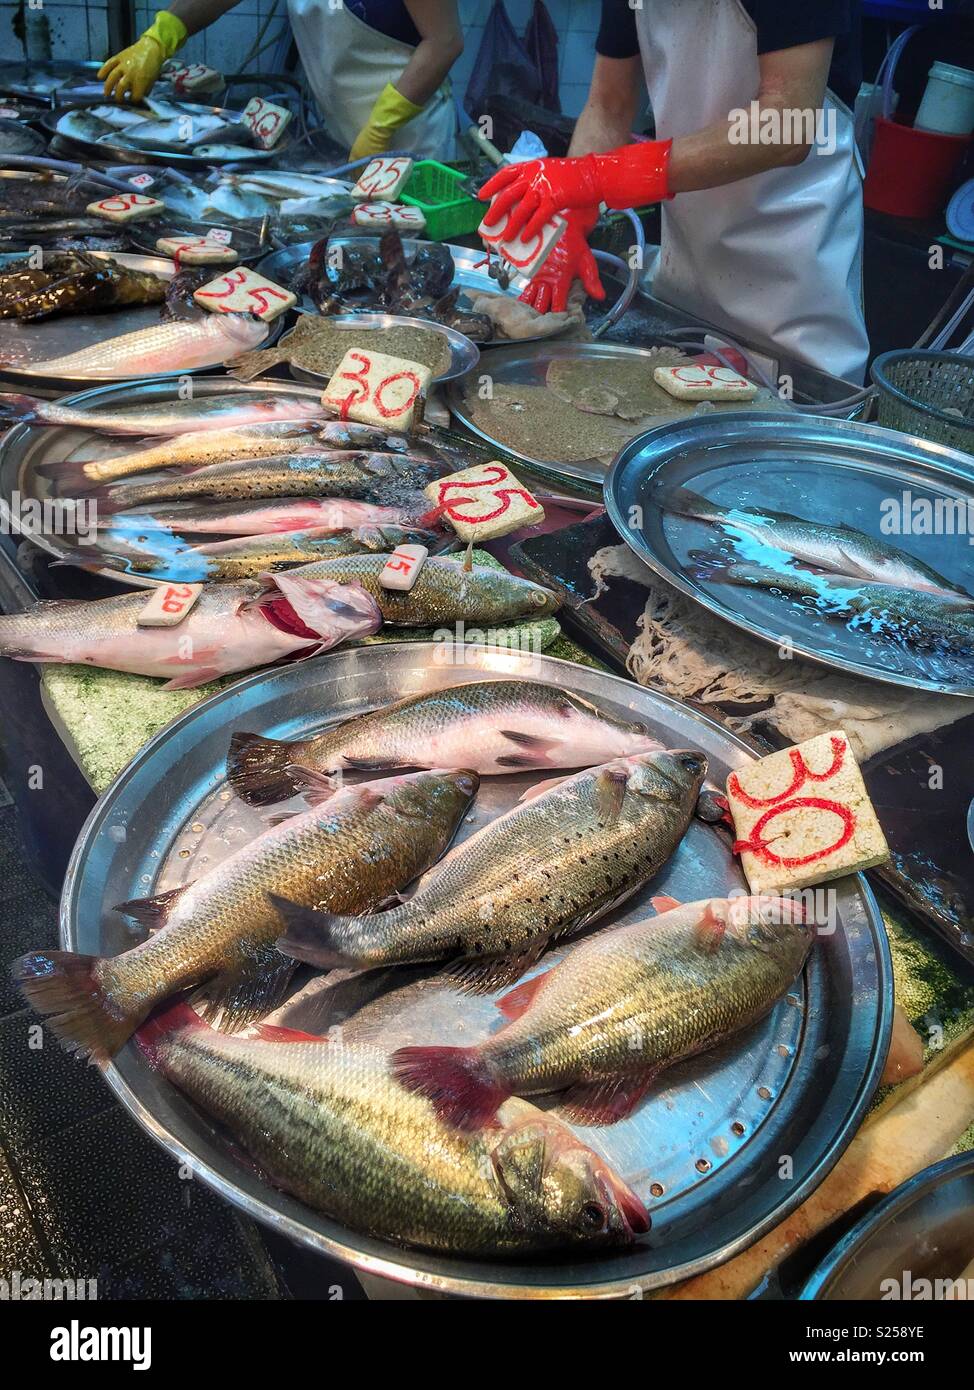 Live fish for sale in a 'wet market', Yuen Long, New Territories, Hong Kong Stock Photo